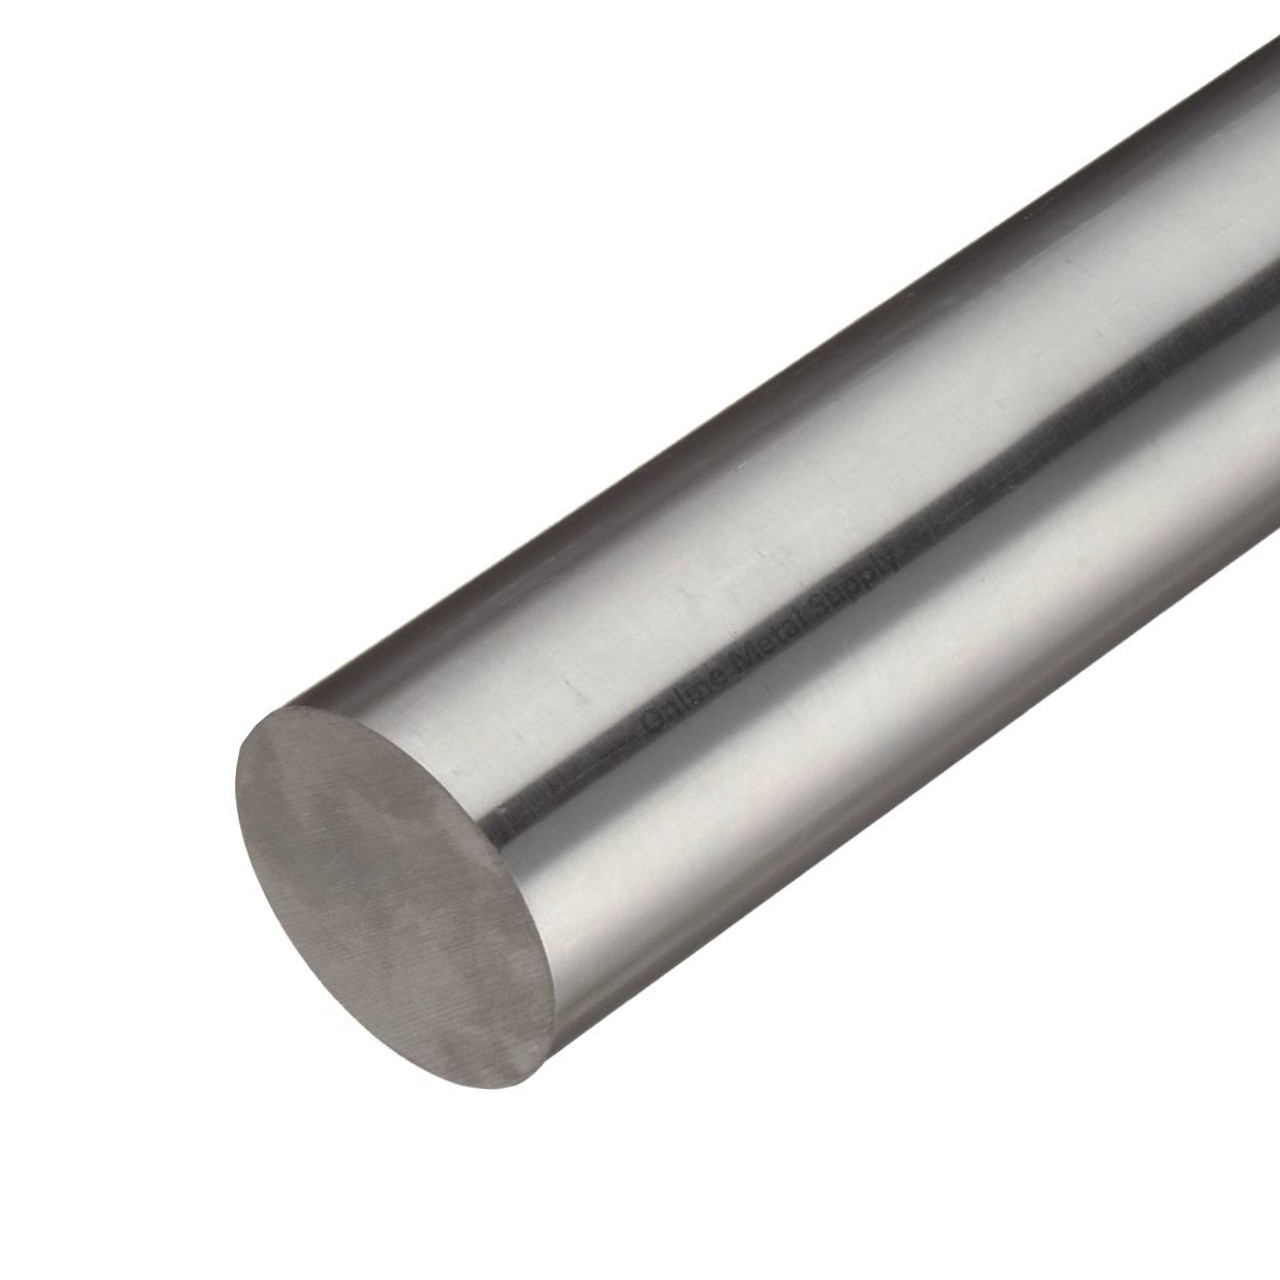 1.625 (1-5/8 inch) x 20 inches, 316 Stainless Steel Round Rod, Cold Finished